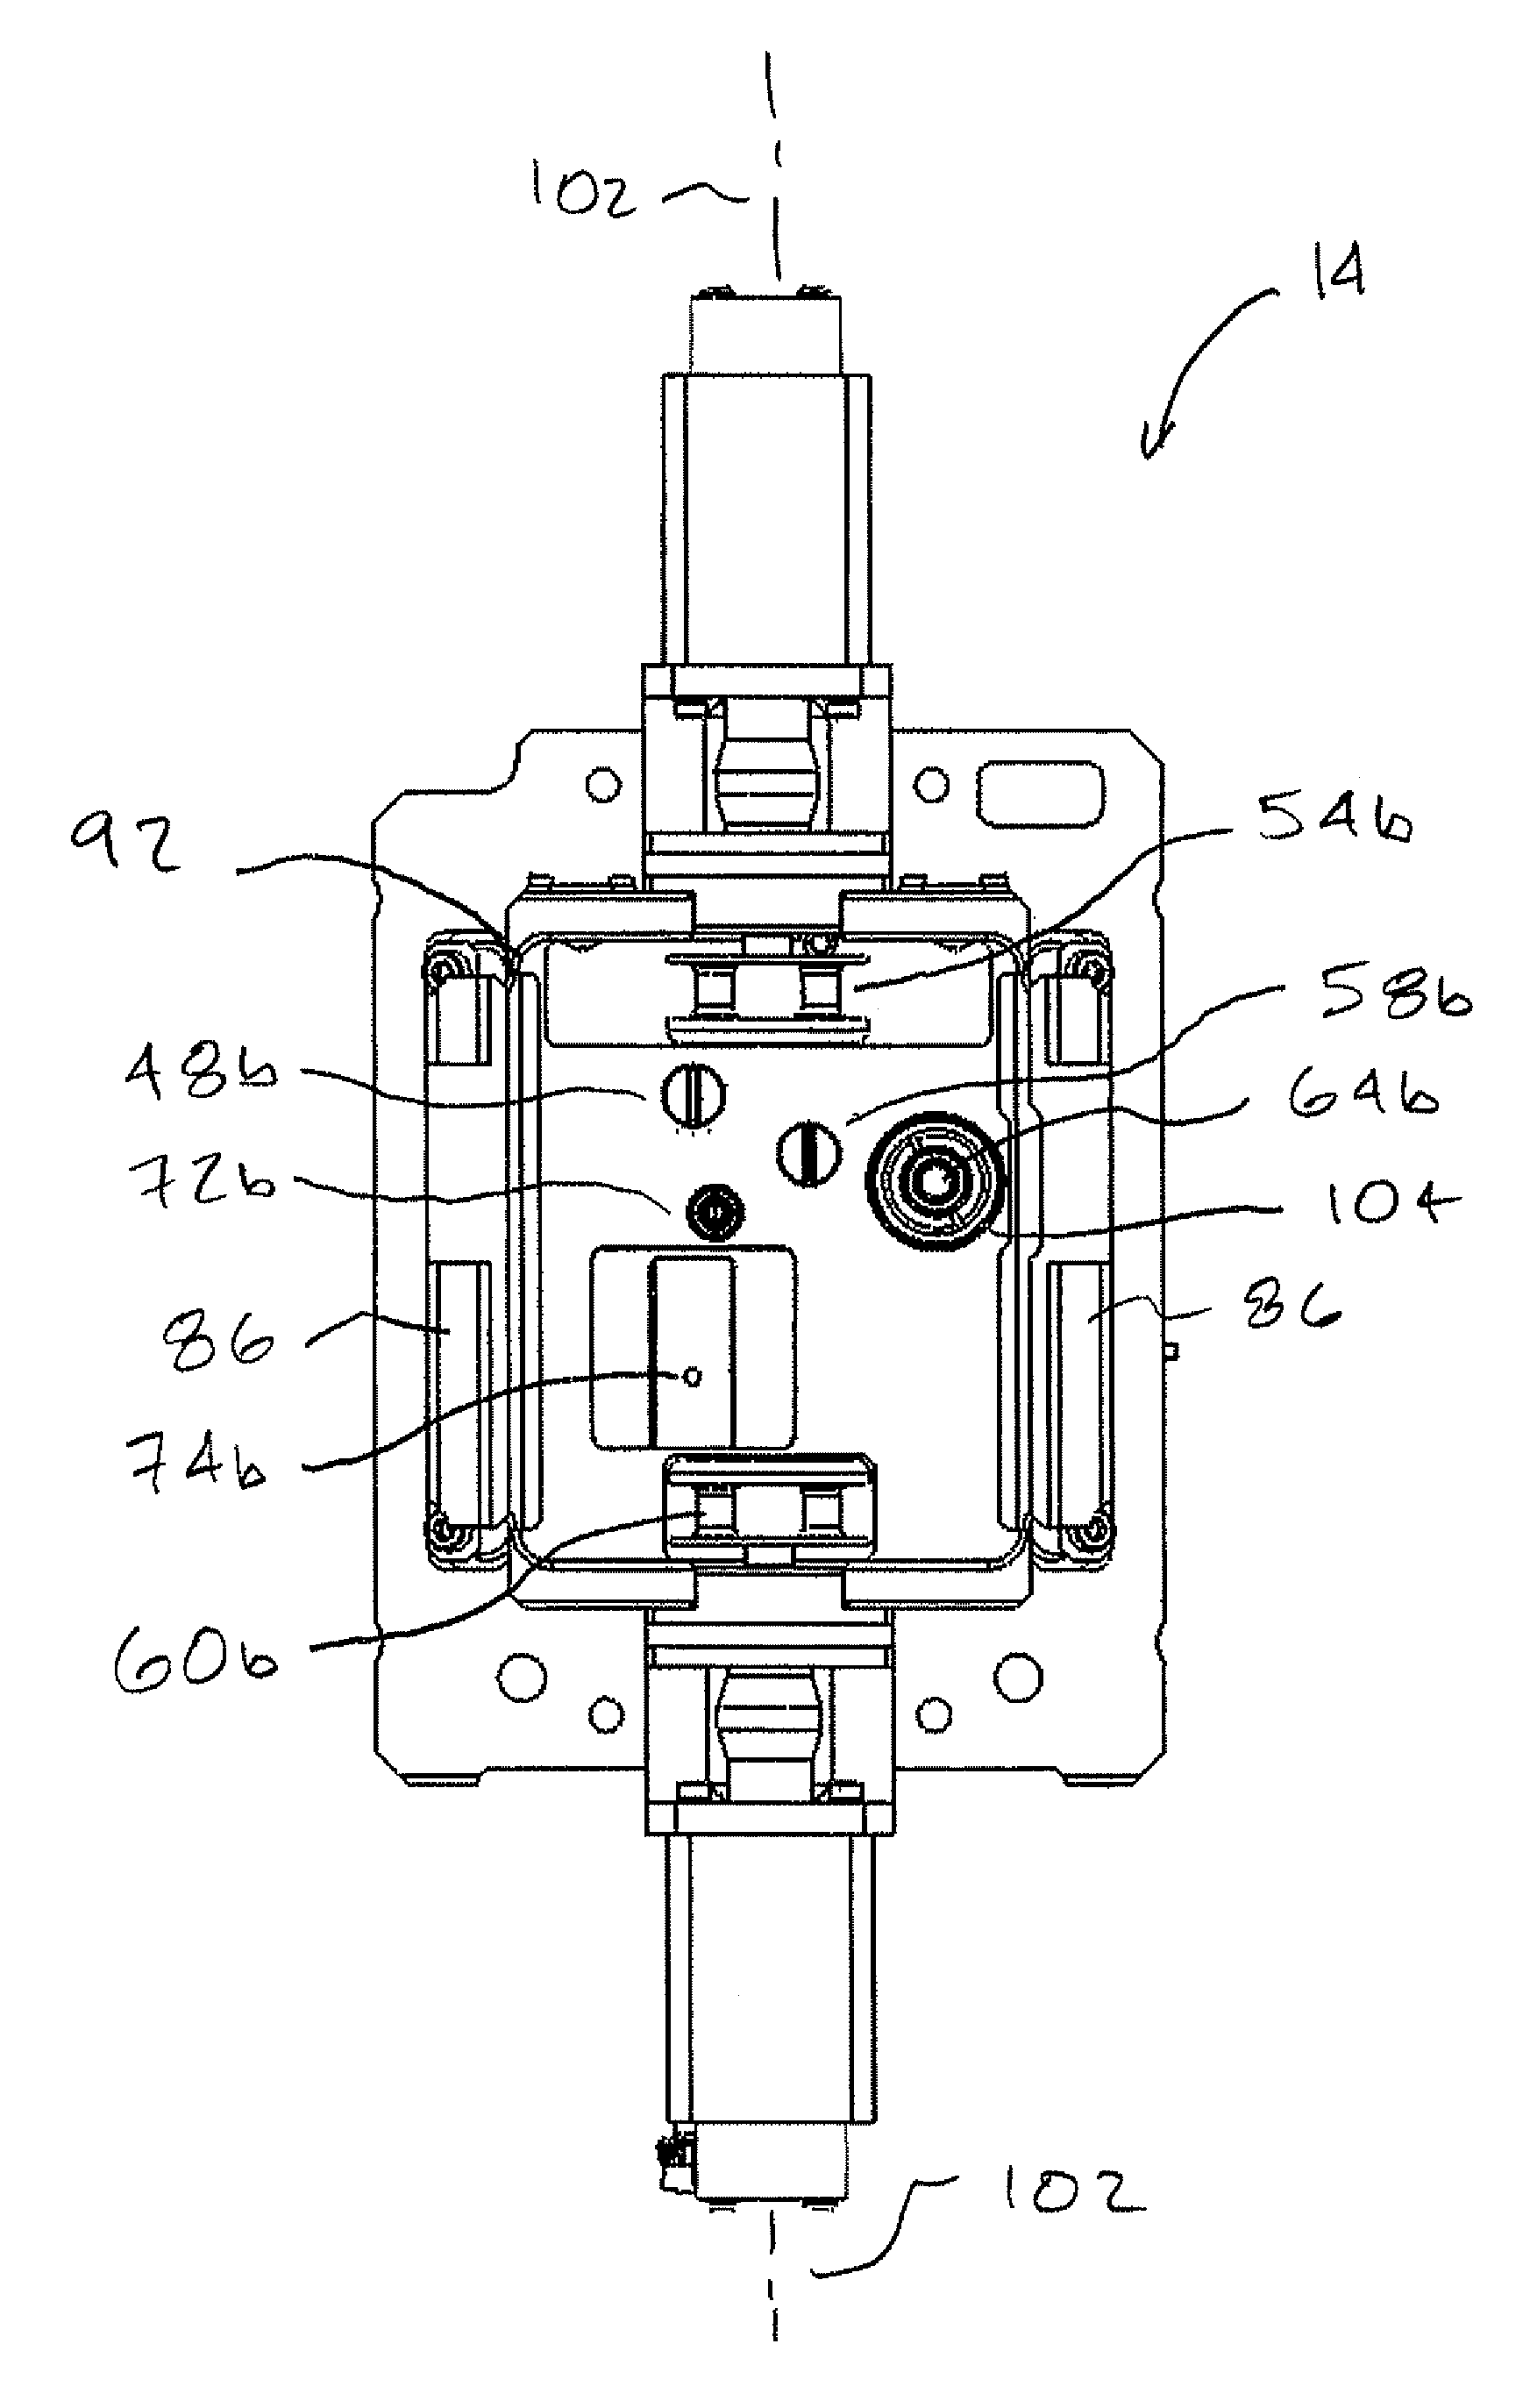 Loading system for alignment of fluidics cassette to console